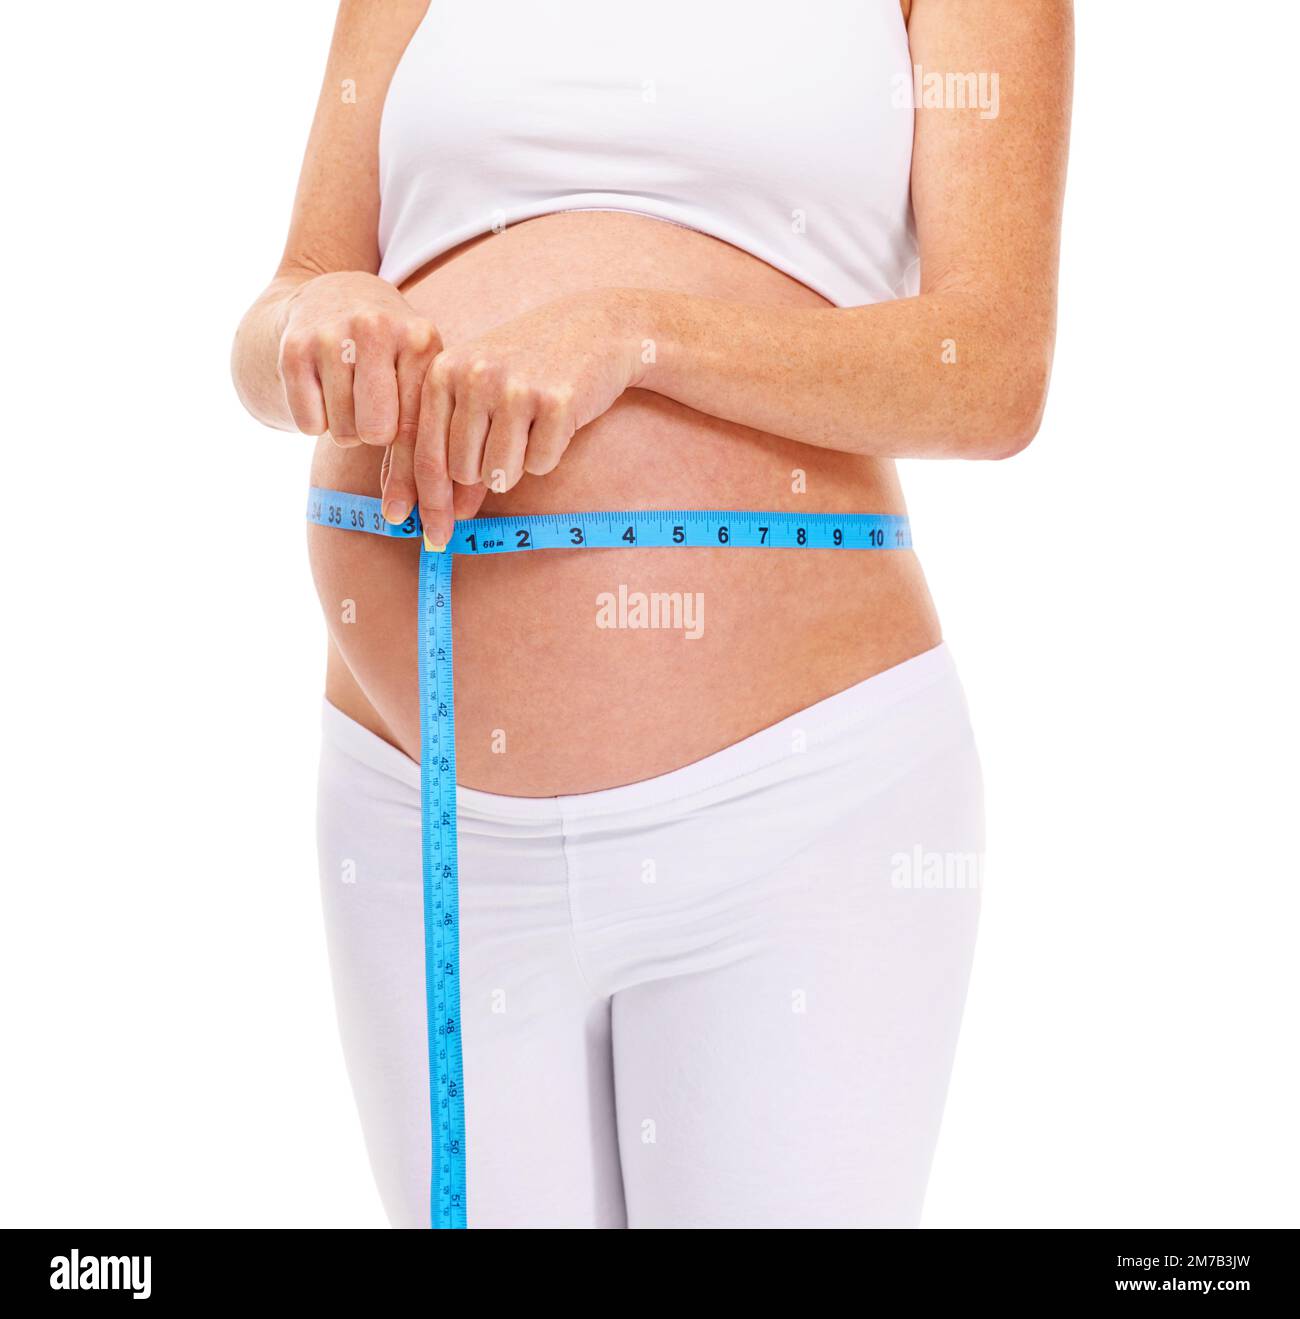 This little guy is growing. An expectant mother measuring her belly. Stock Photo